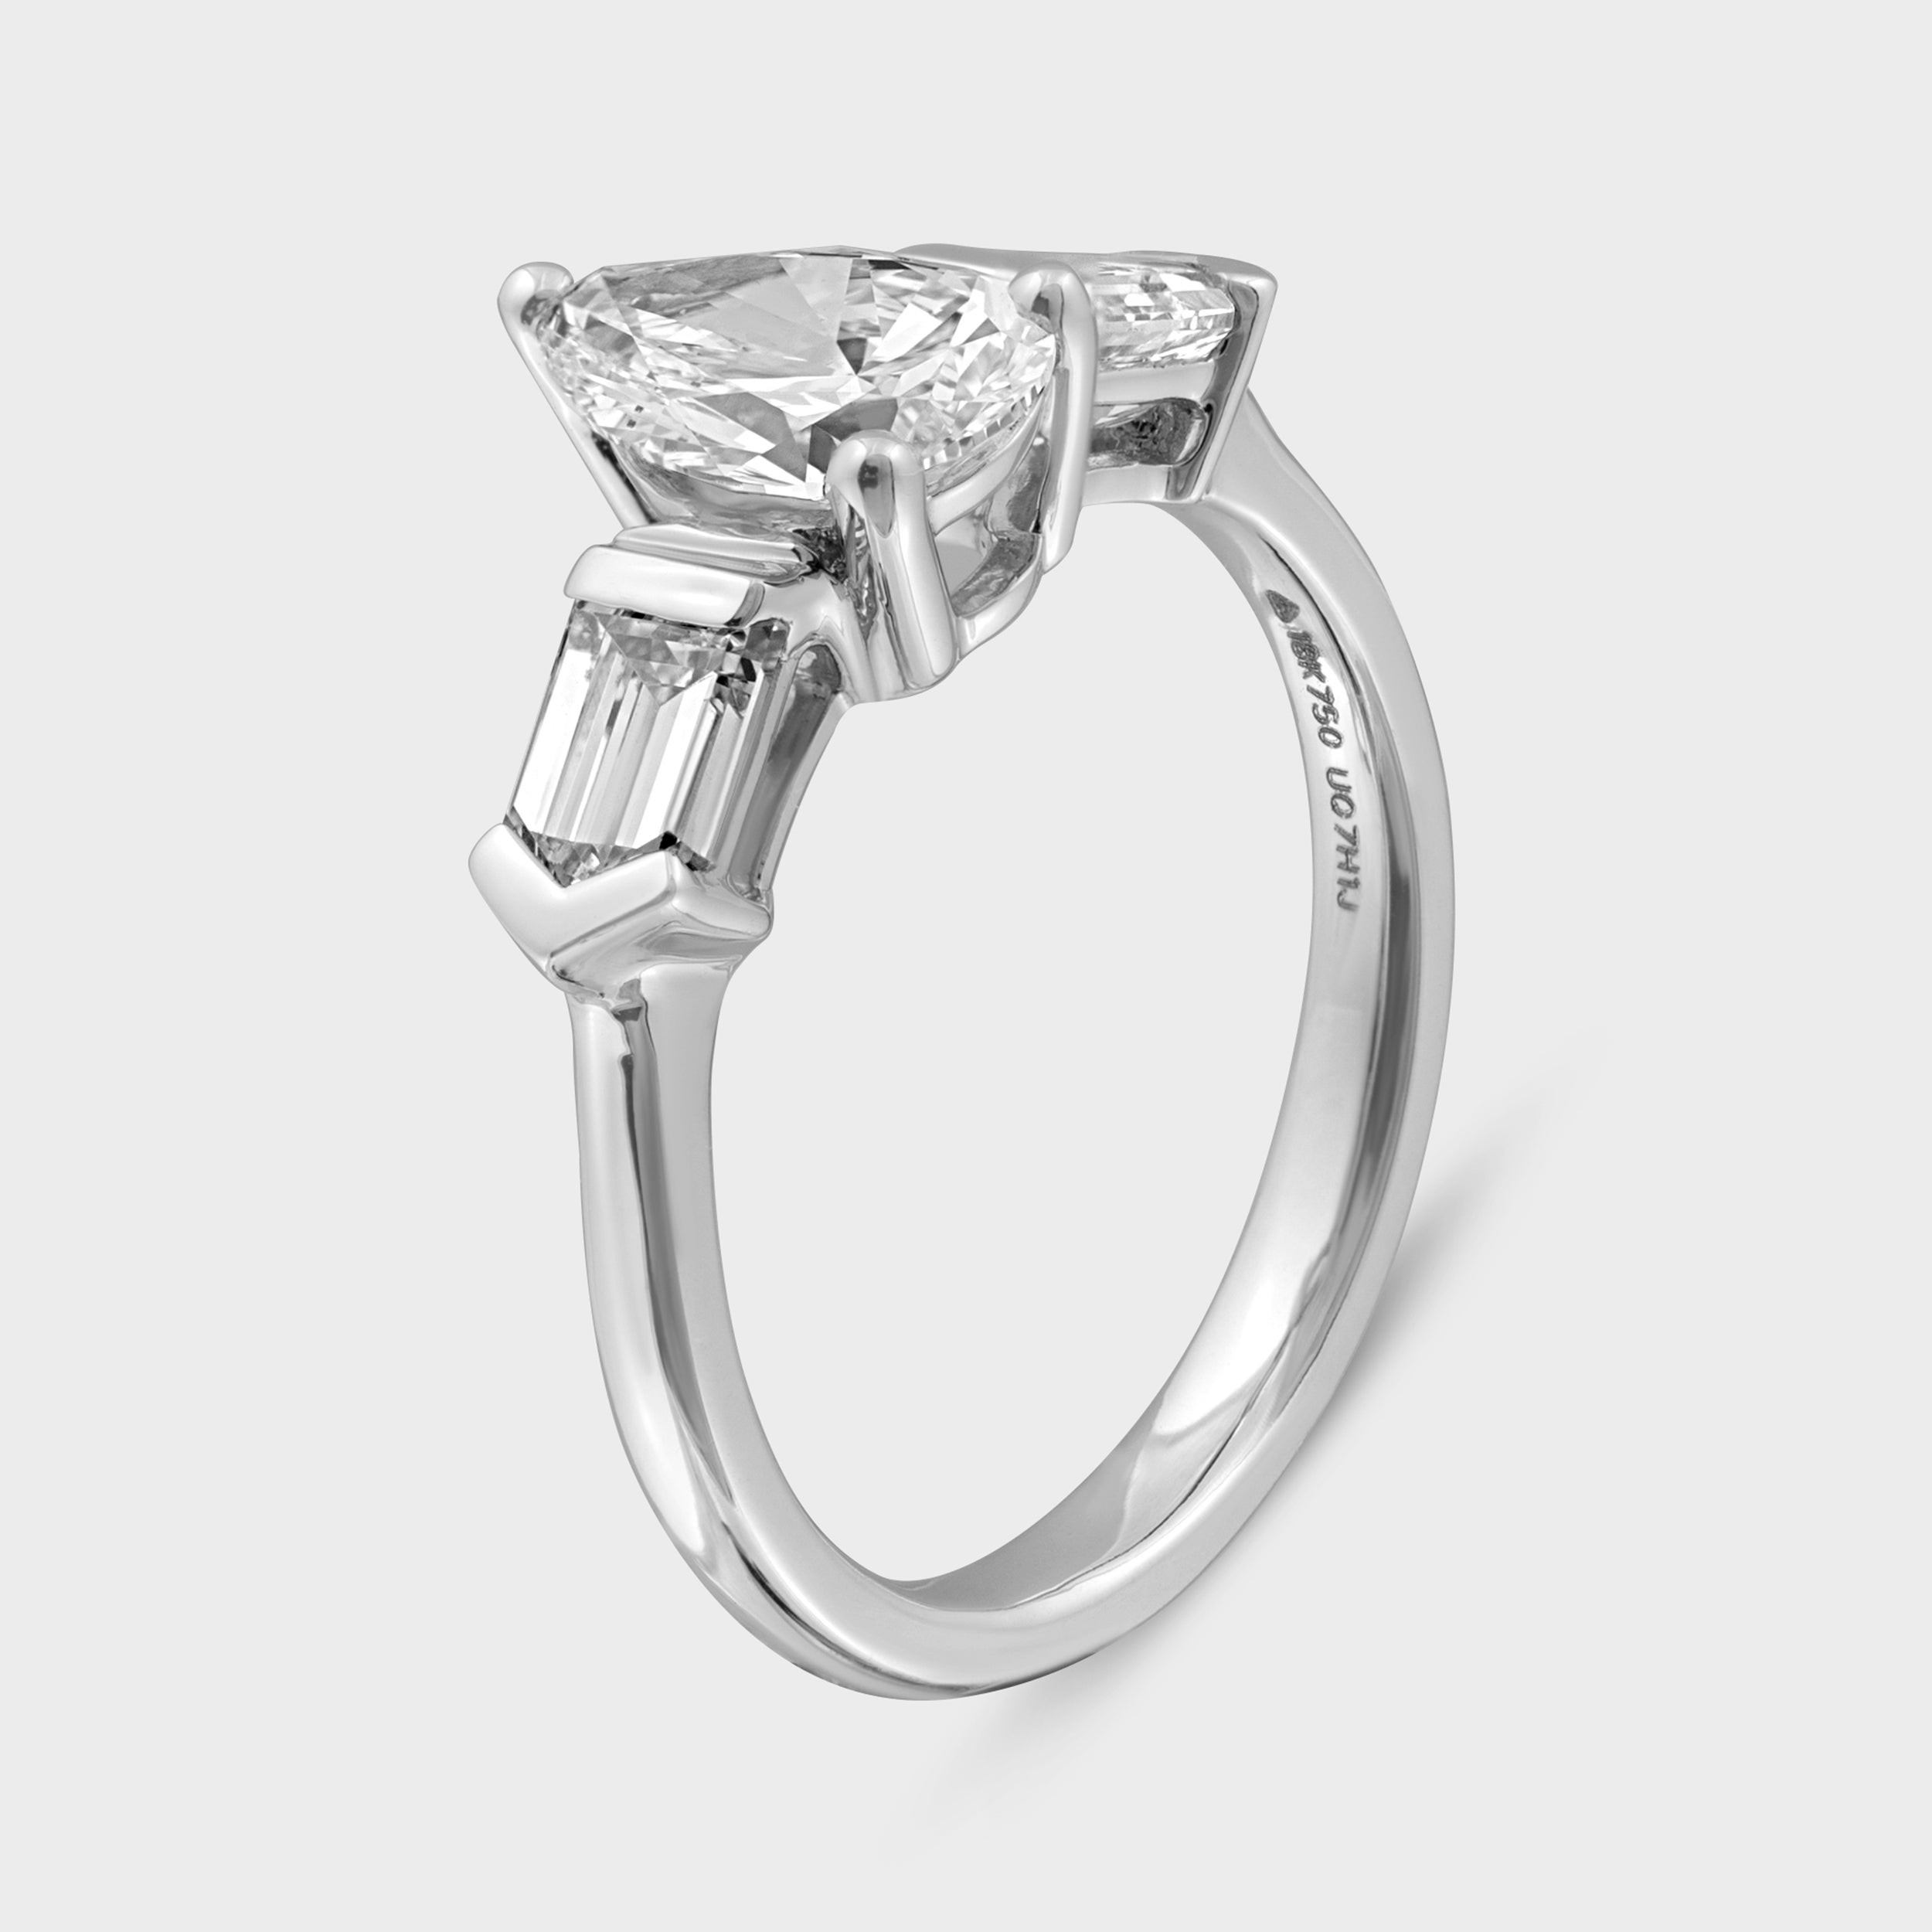 Pear & Baguette Cut 1.01 Carat & 0.74 Carat Lab Grown Solitaire Diamond Ring in White Gold | SKU : 0019512297